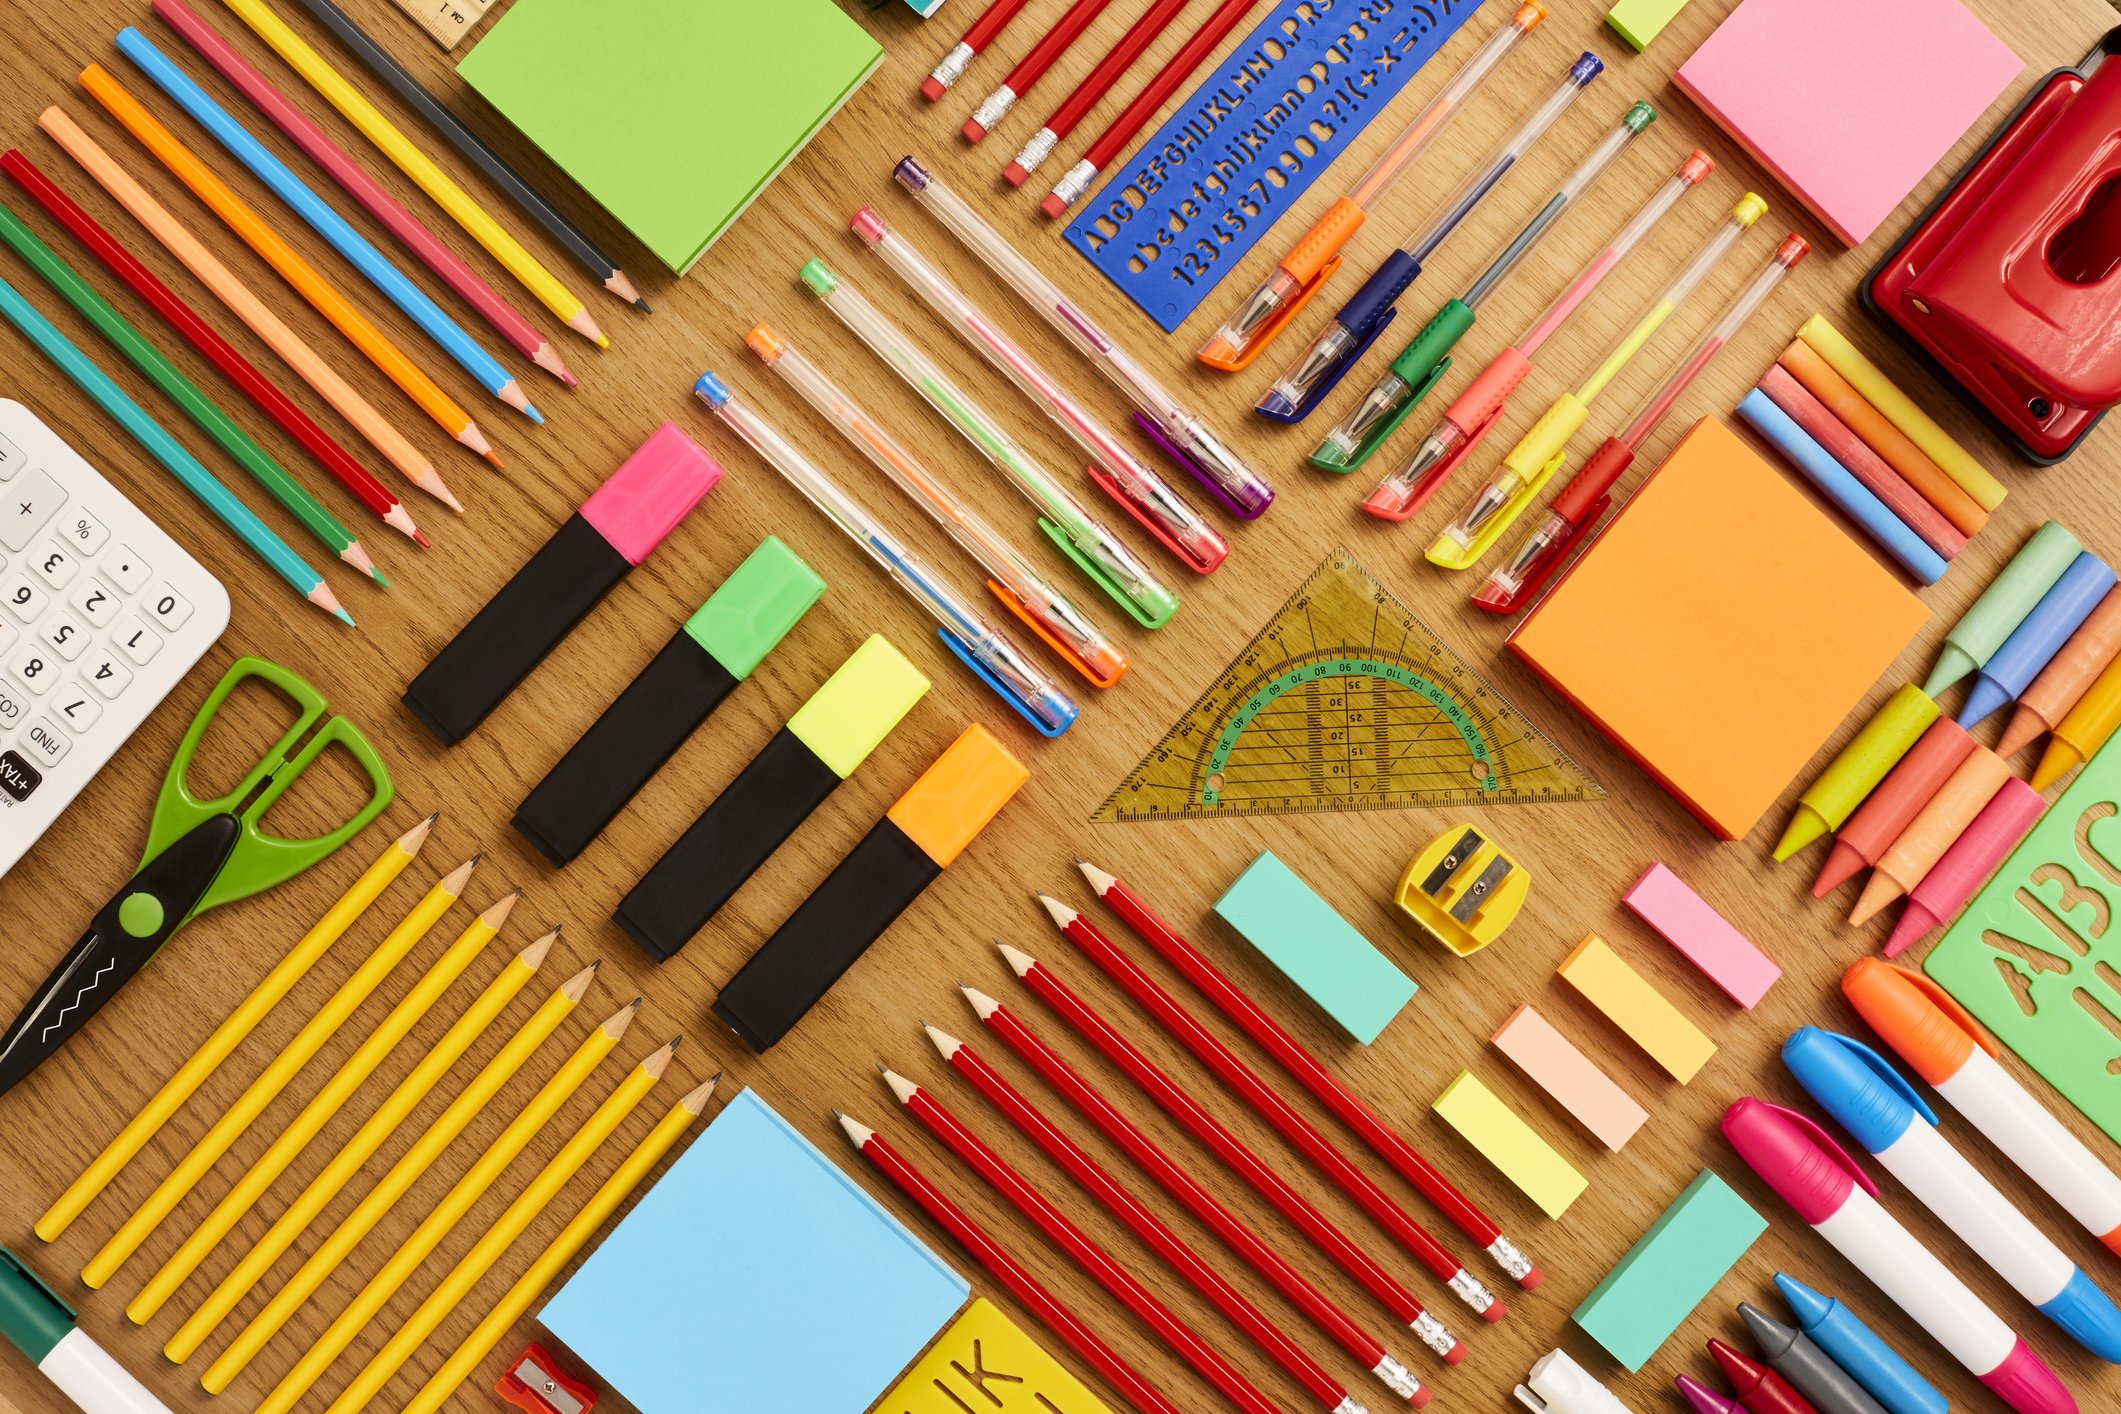 5 Ways to Budget for the Average Cost of School Supplies - Regional Finance